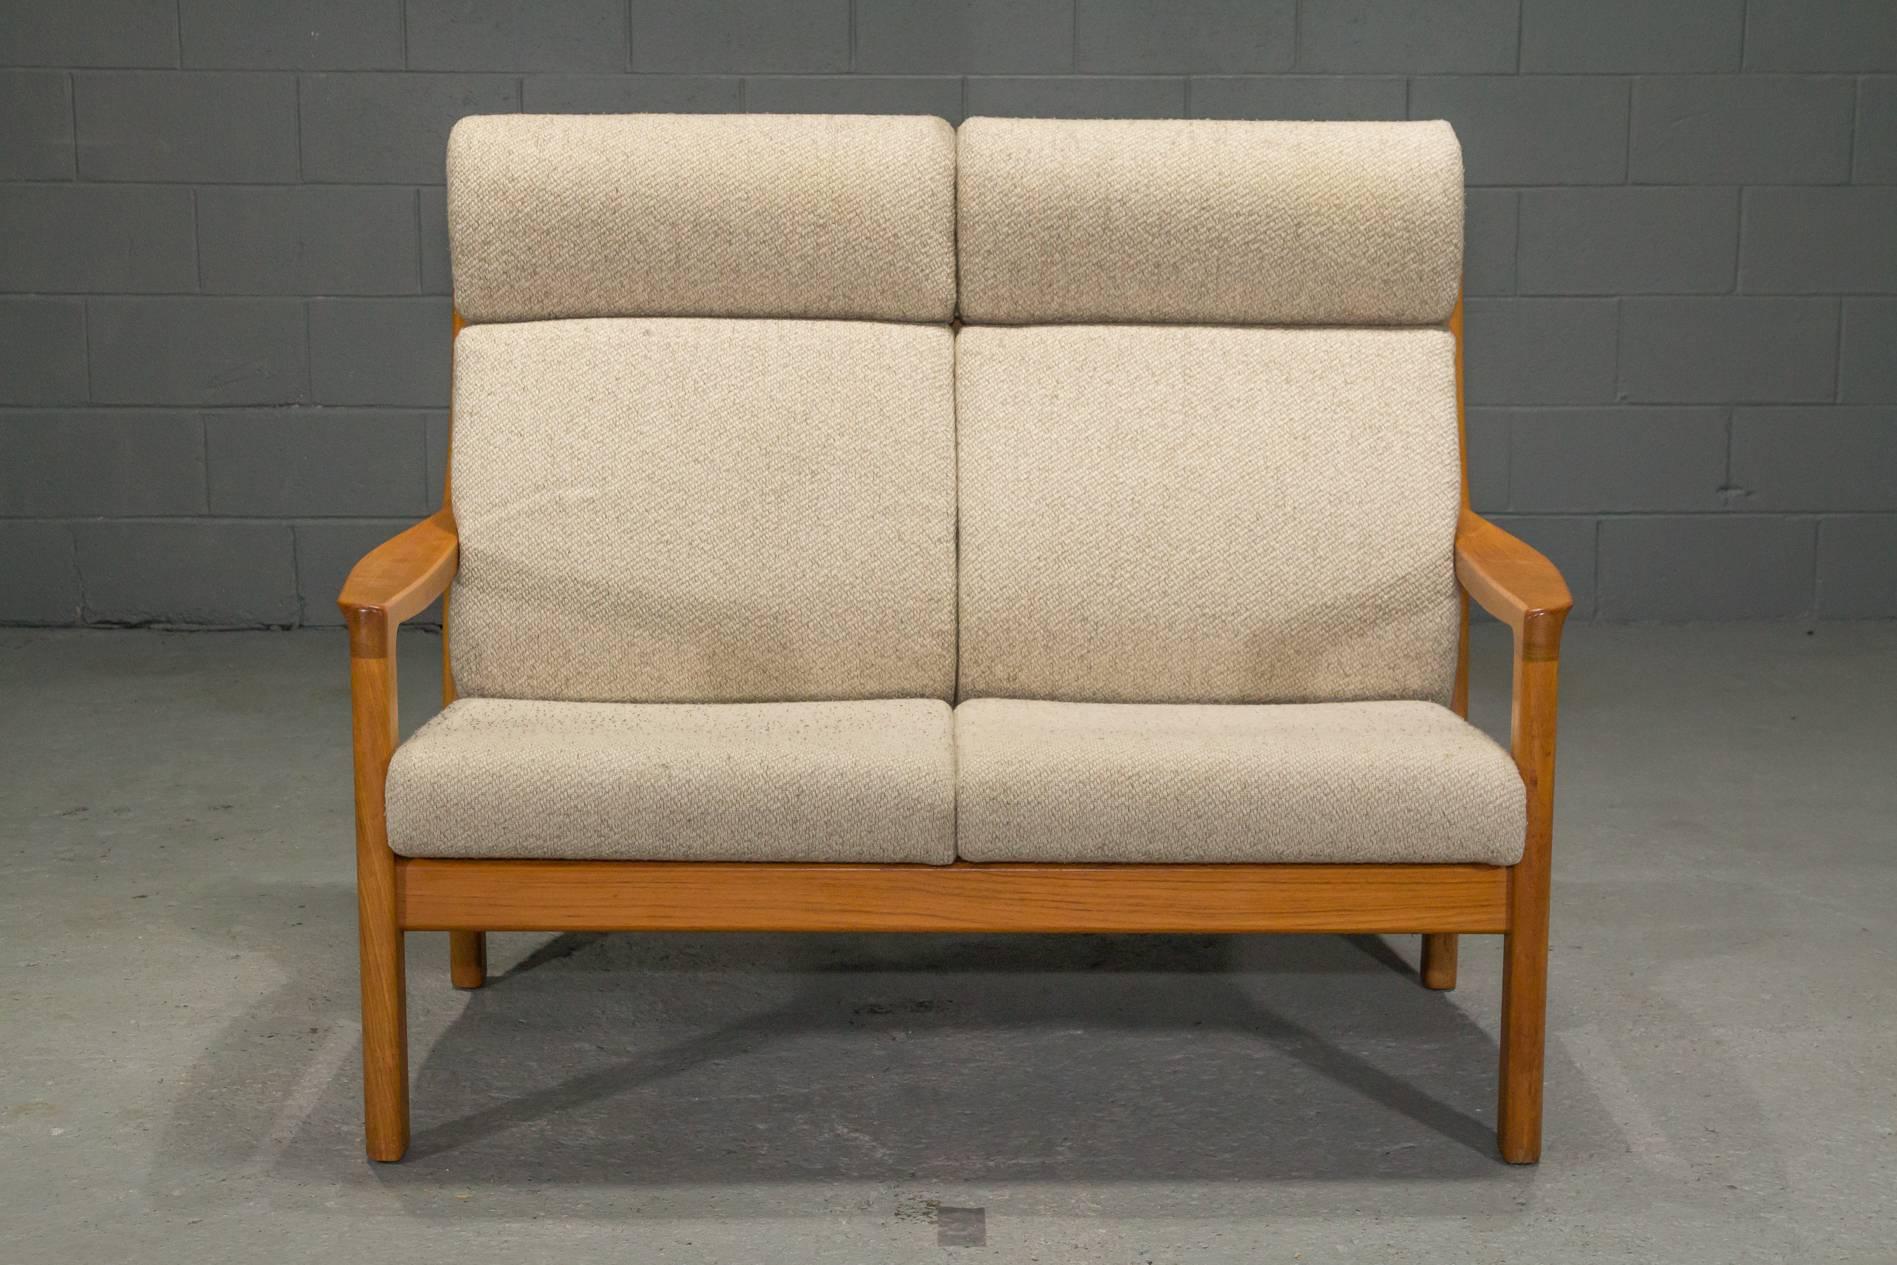 Teak high back loveseat by Johannes Andersen for CFC Silkeborg. Extremely comfortable and supportive.